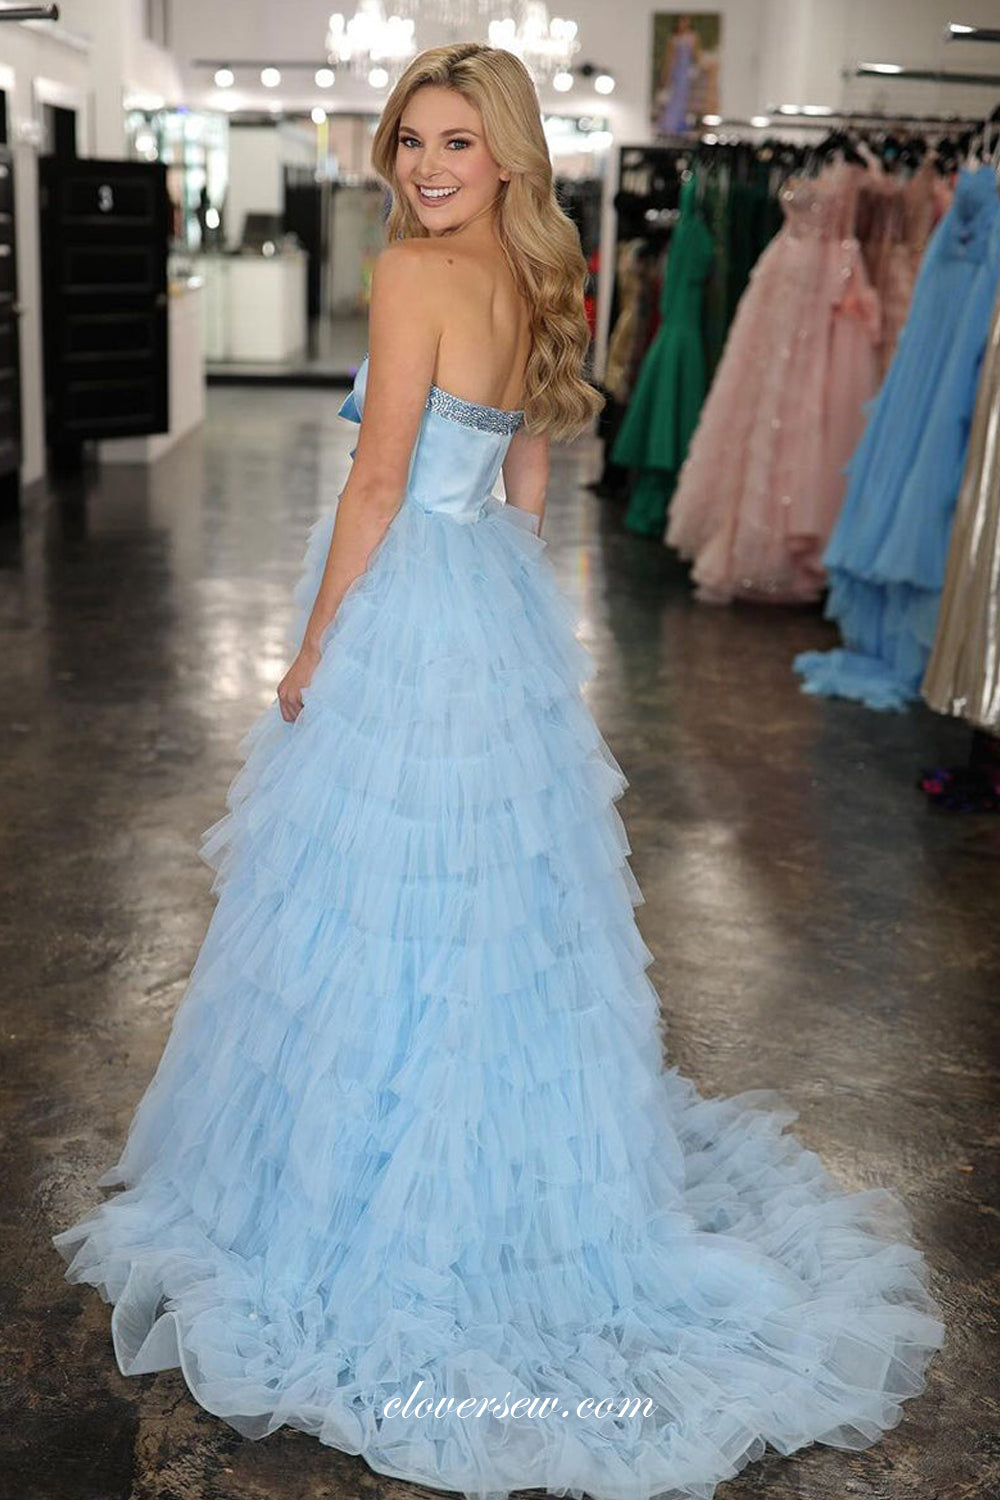 Pale Blue Beading Strapless With Bowknot Ruffles Tulle Tiered A-line Prom Dresses, CP1122